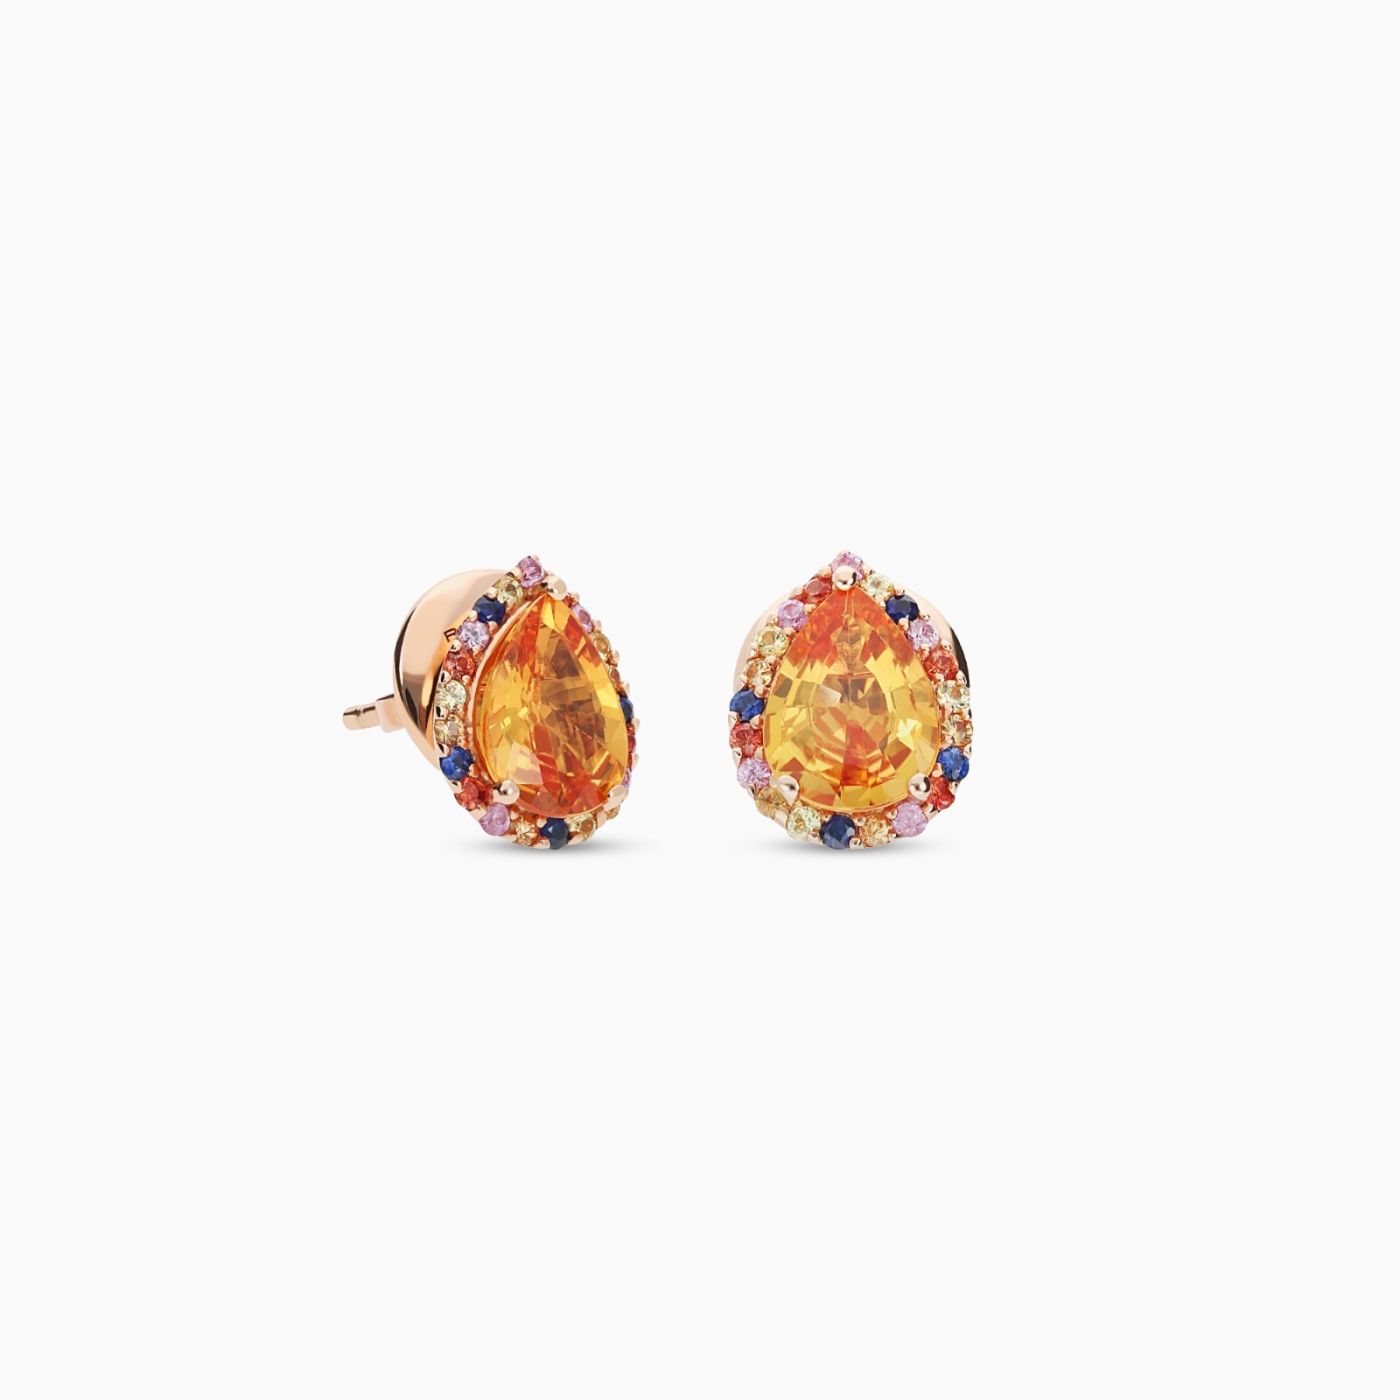 Rose gold earrings with pear-cut yellow sapphires and multicoloured sapphires